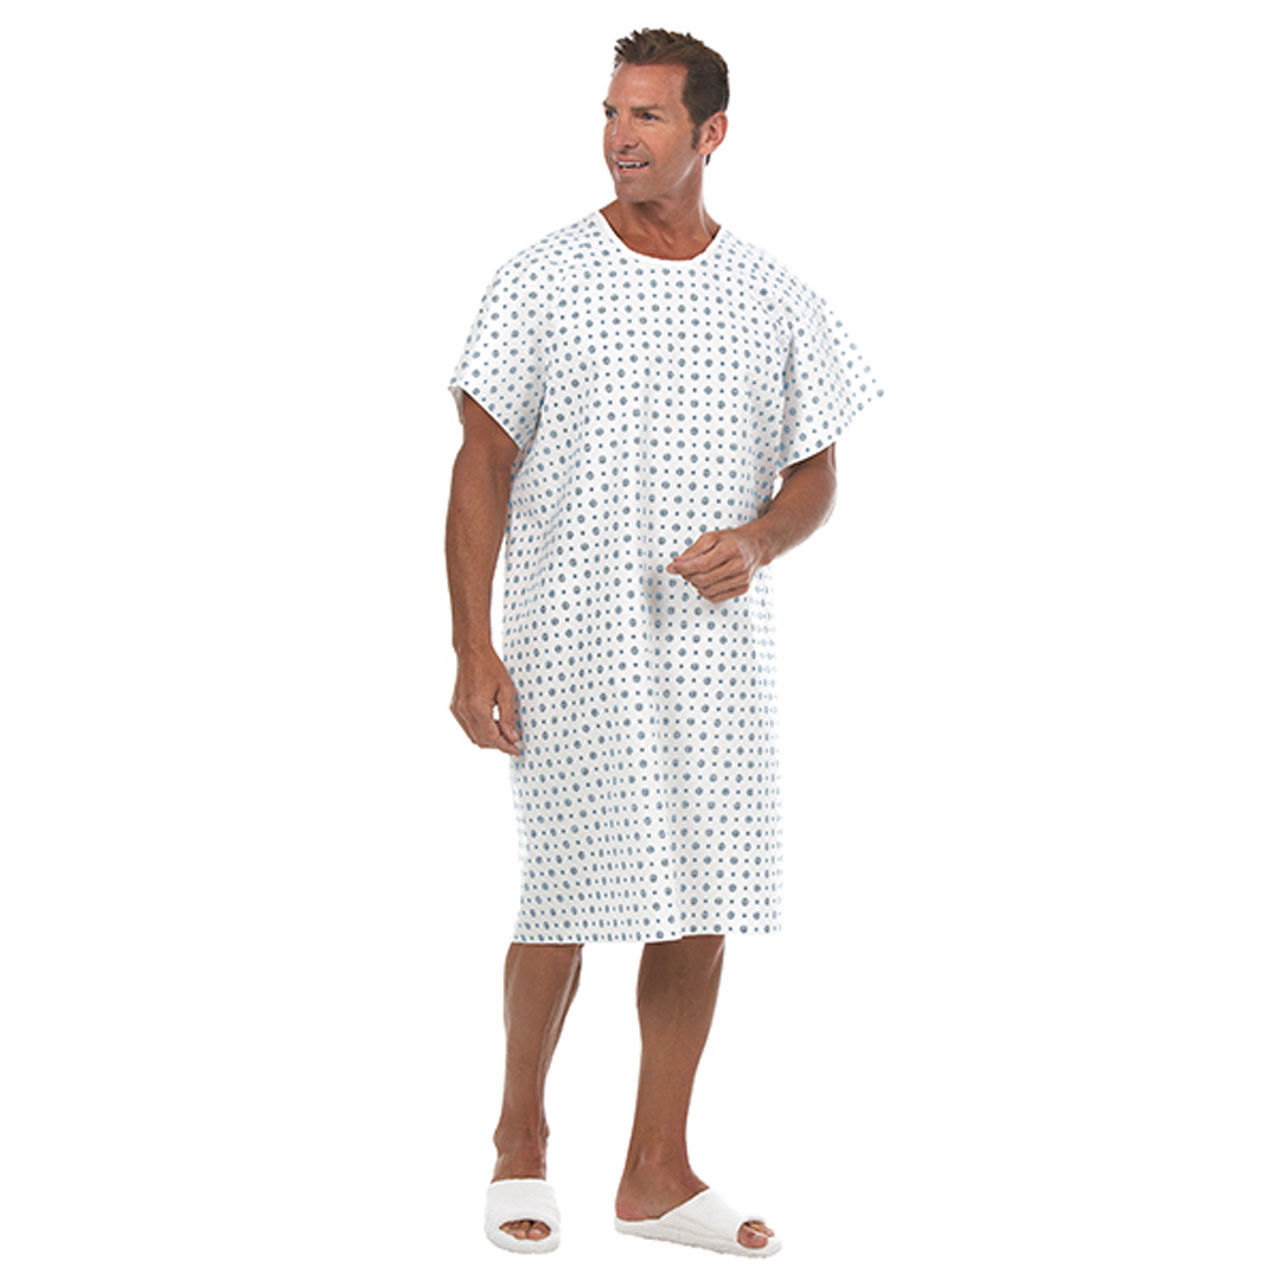 Are the wholesale comfortable patient gowns designed to ensure full coverage?